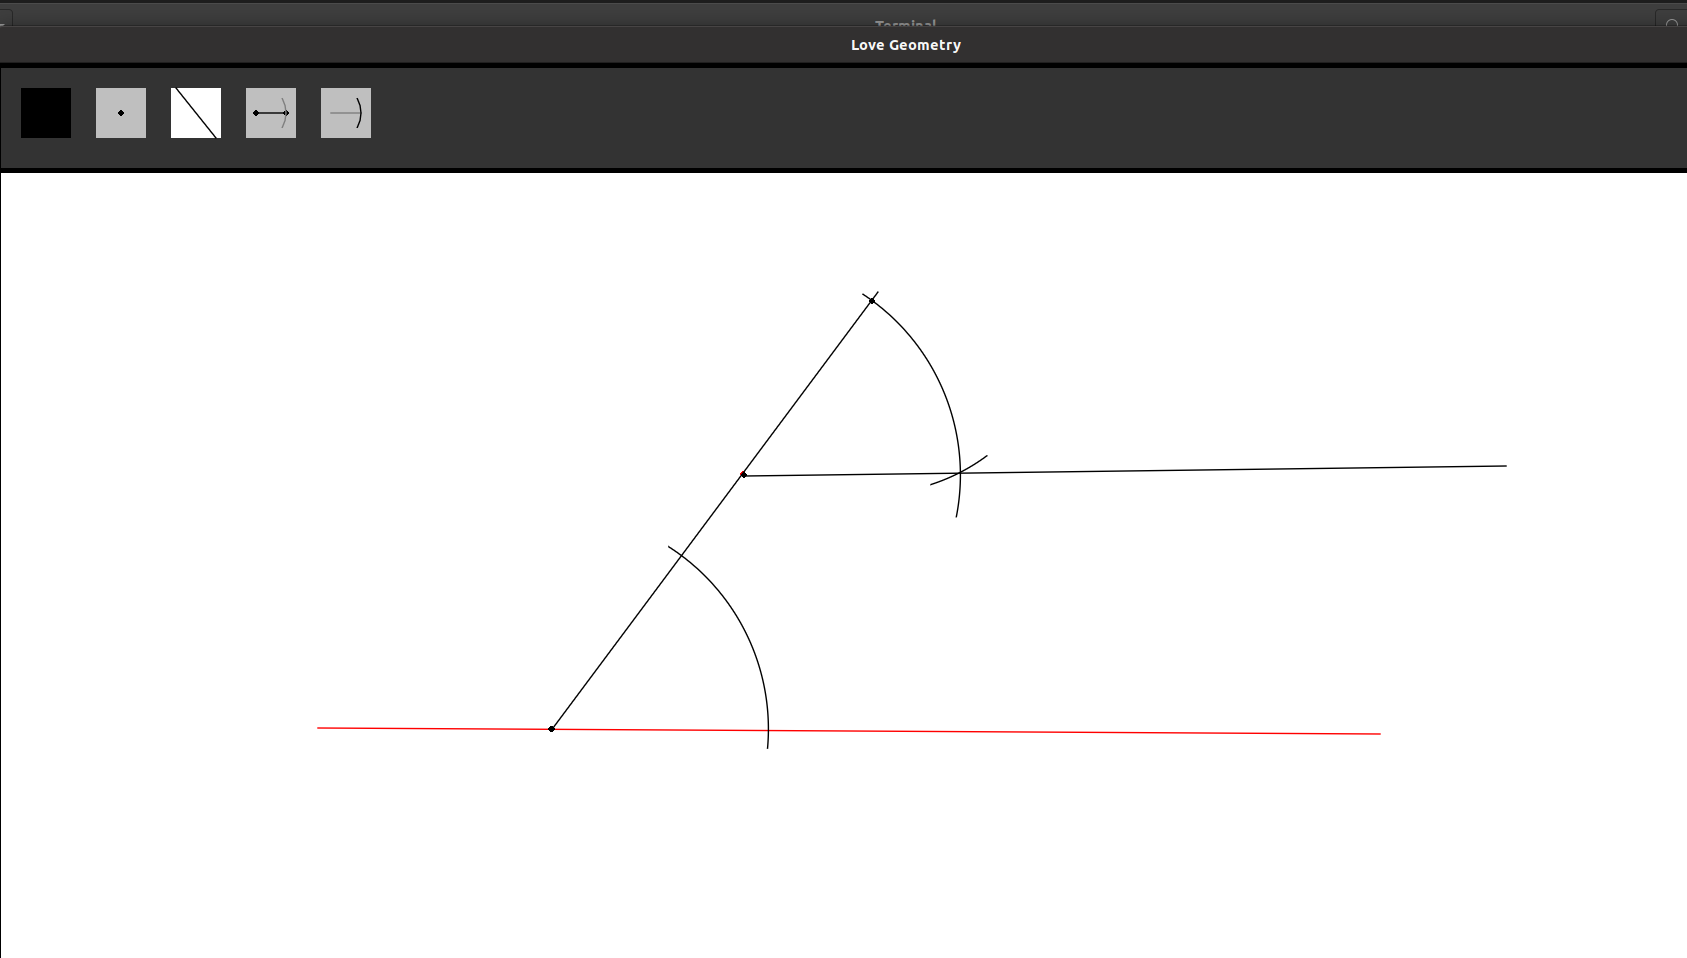 Constructing a second line (in black) parallel to a given line (red) passing through a given point.